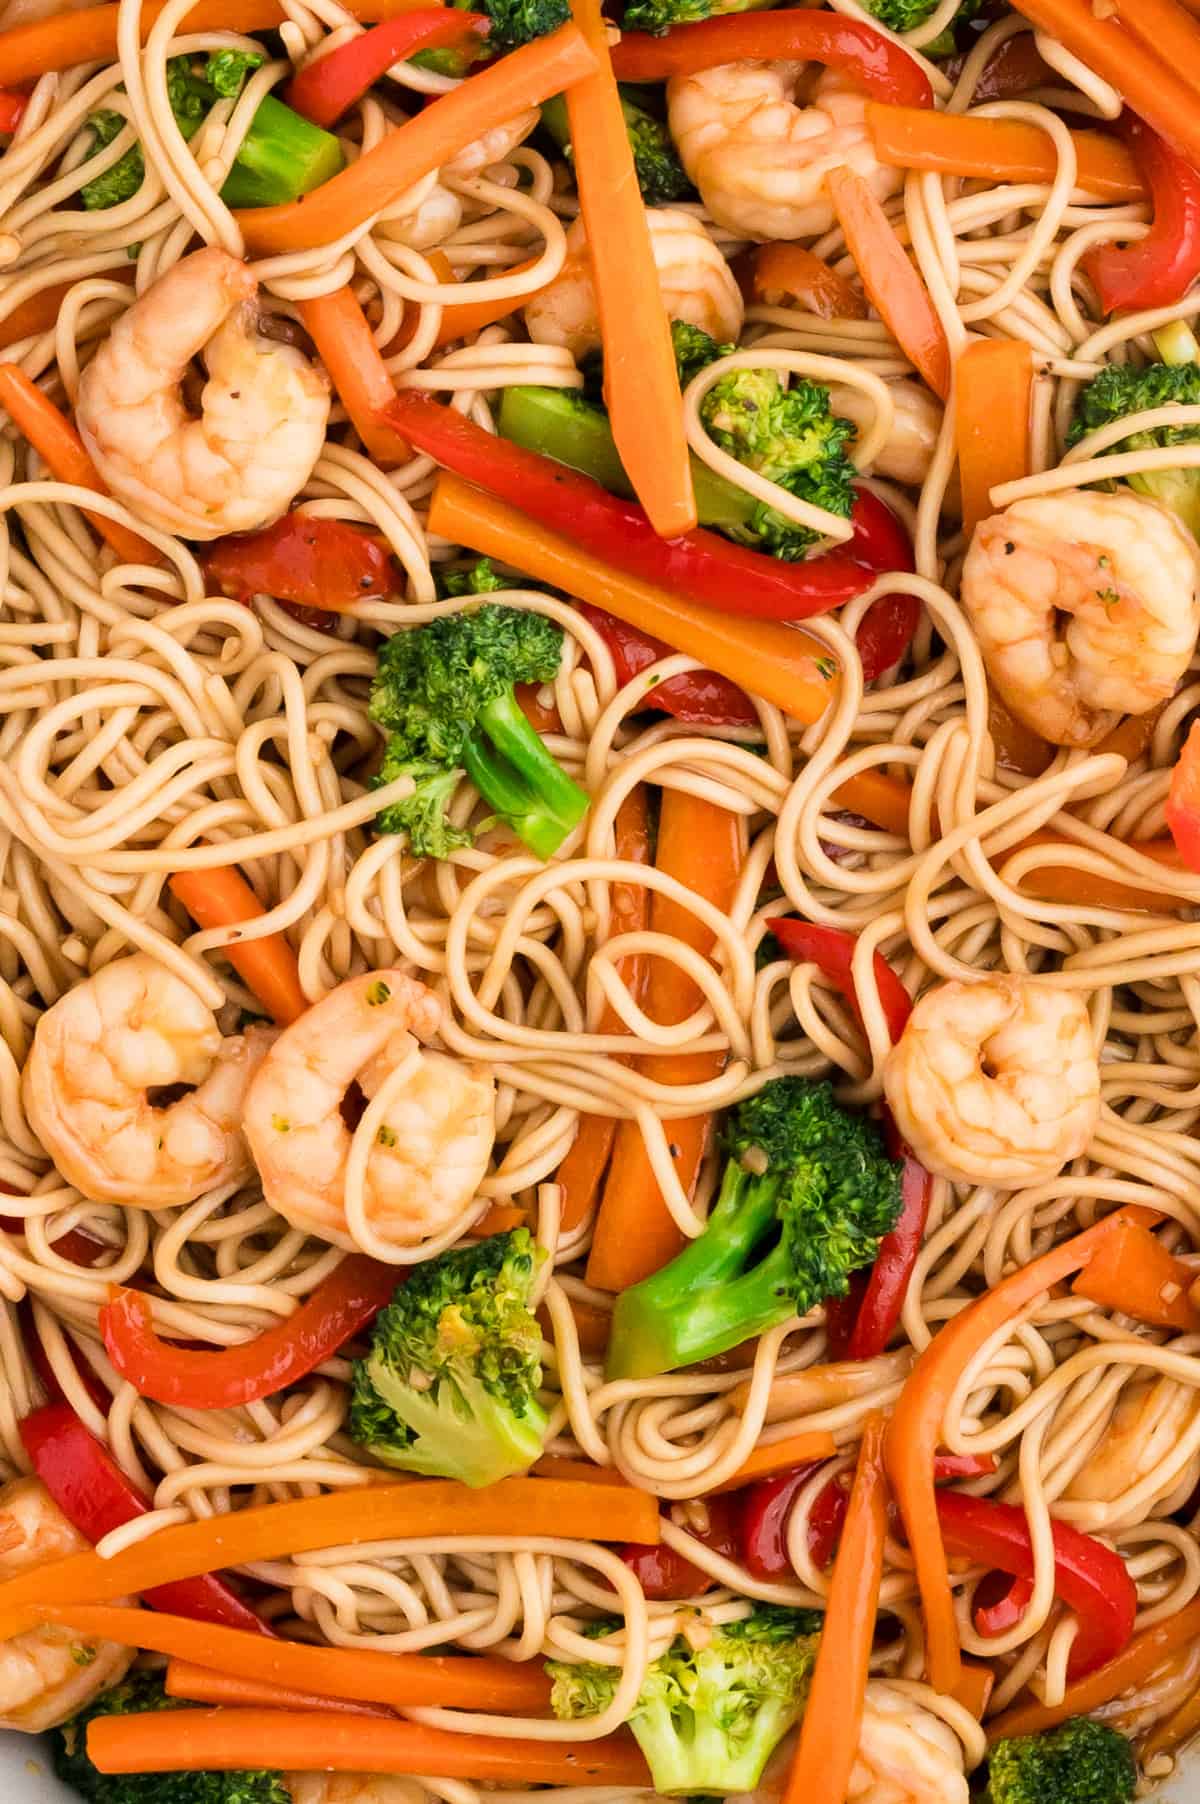 A close up view of shrimp lo mein, with lo mein noodles and veggies fully filling the frame.